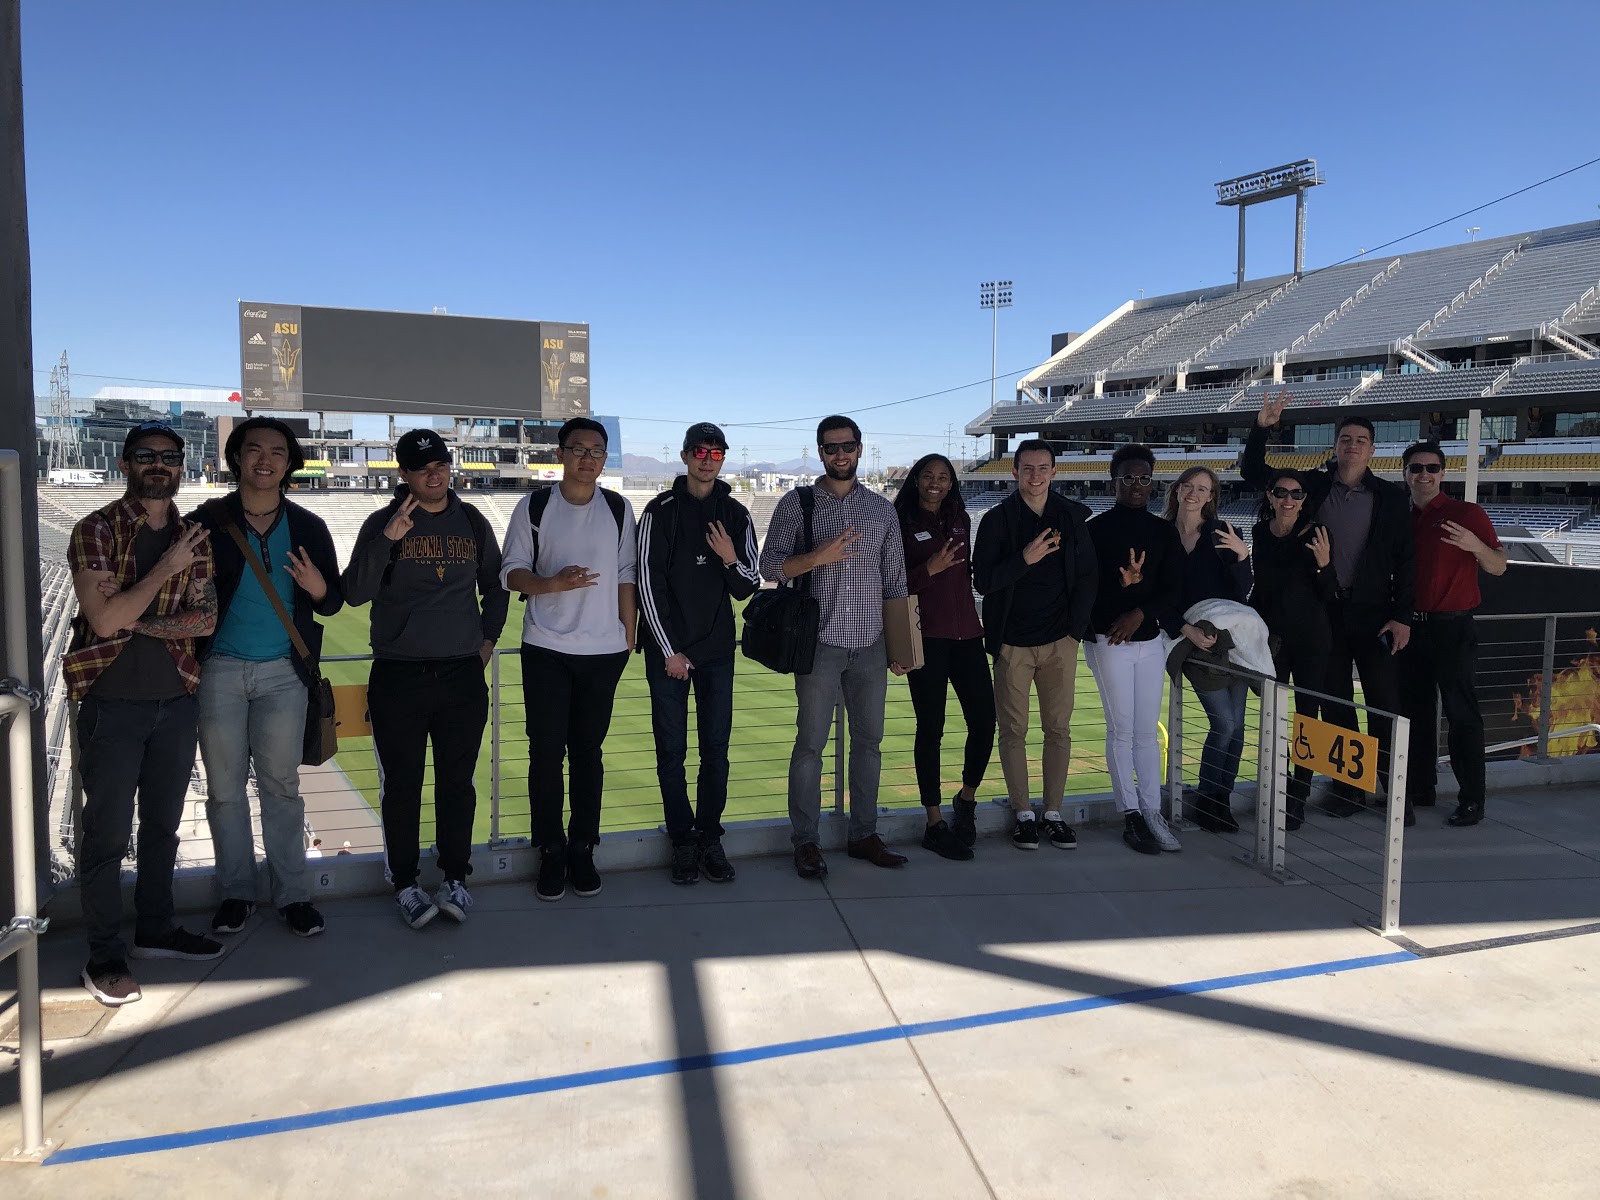 Students on the tour pose on the main concourse at Sun Devil Stadium with the scoreboard in the background